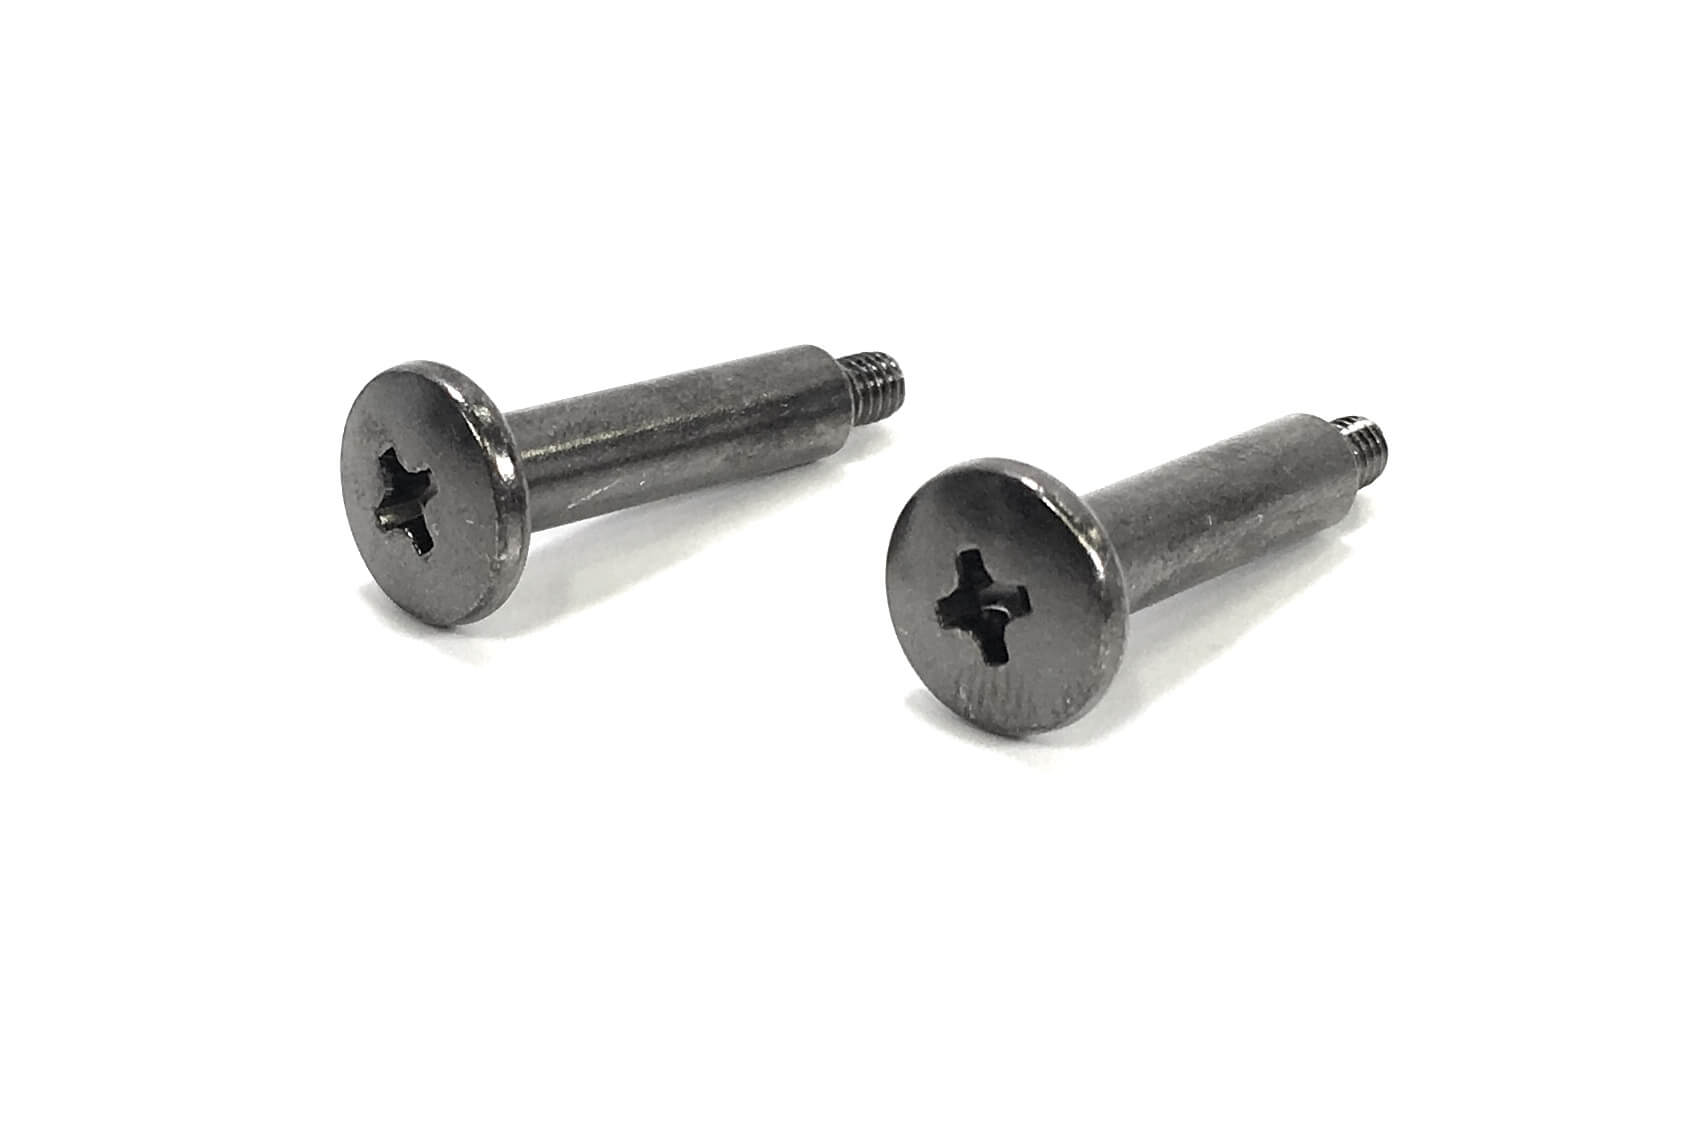 Original Microphone Holder screws that fit on the the Canon XA30 camcorder. It is a genuine Canon part, sourced directly from Canon USA. Brand new factory fresh. Free Shipping.